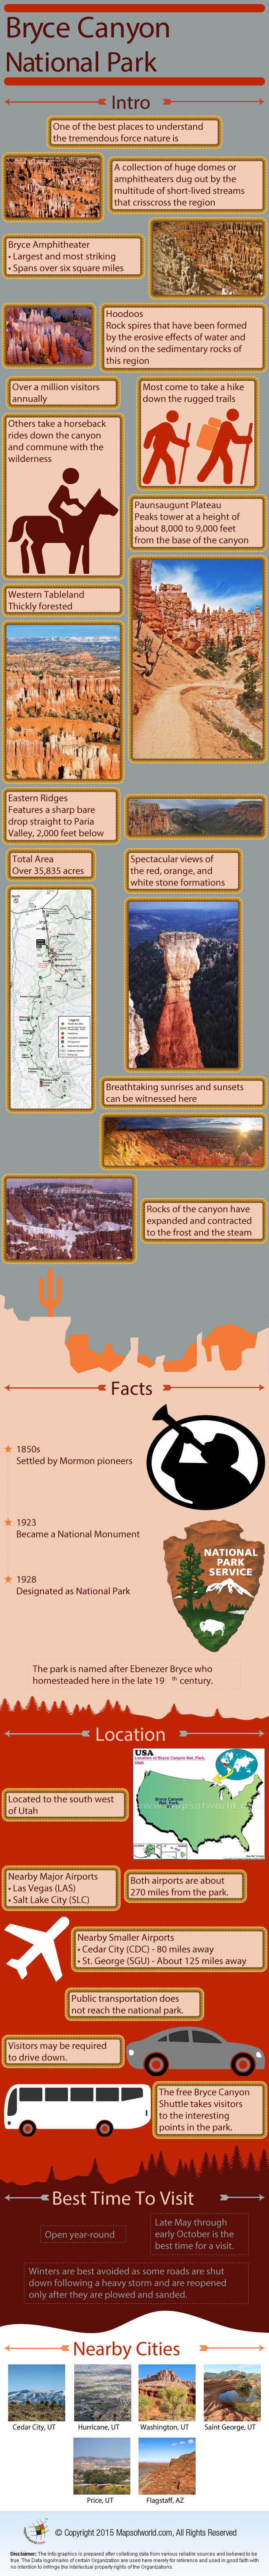 Bryce Canyon National Park Infographic